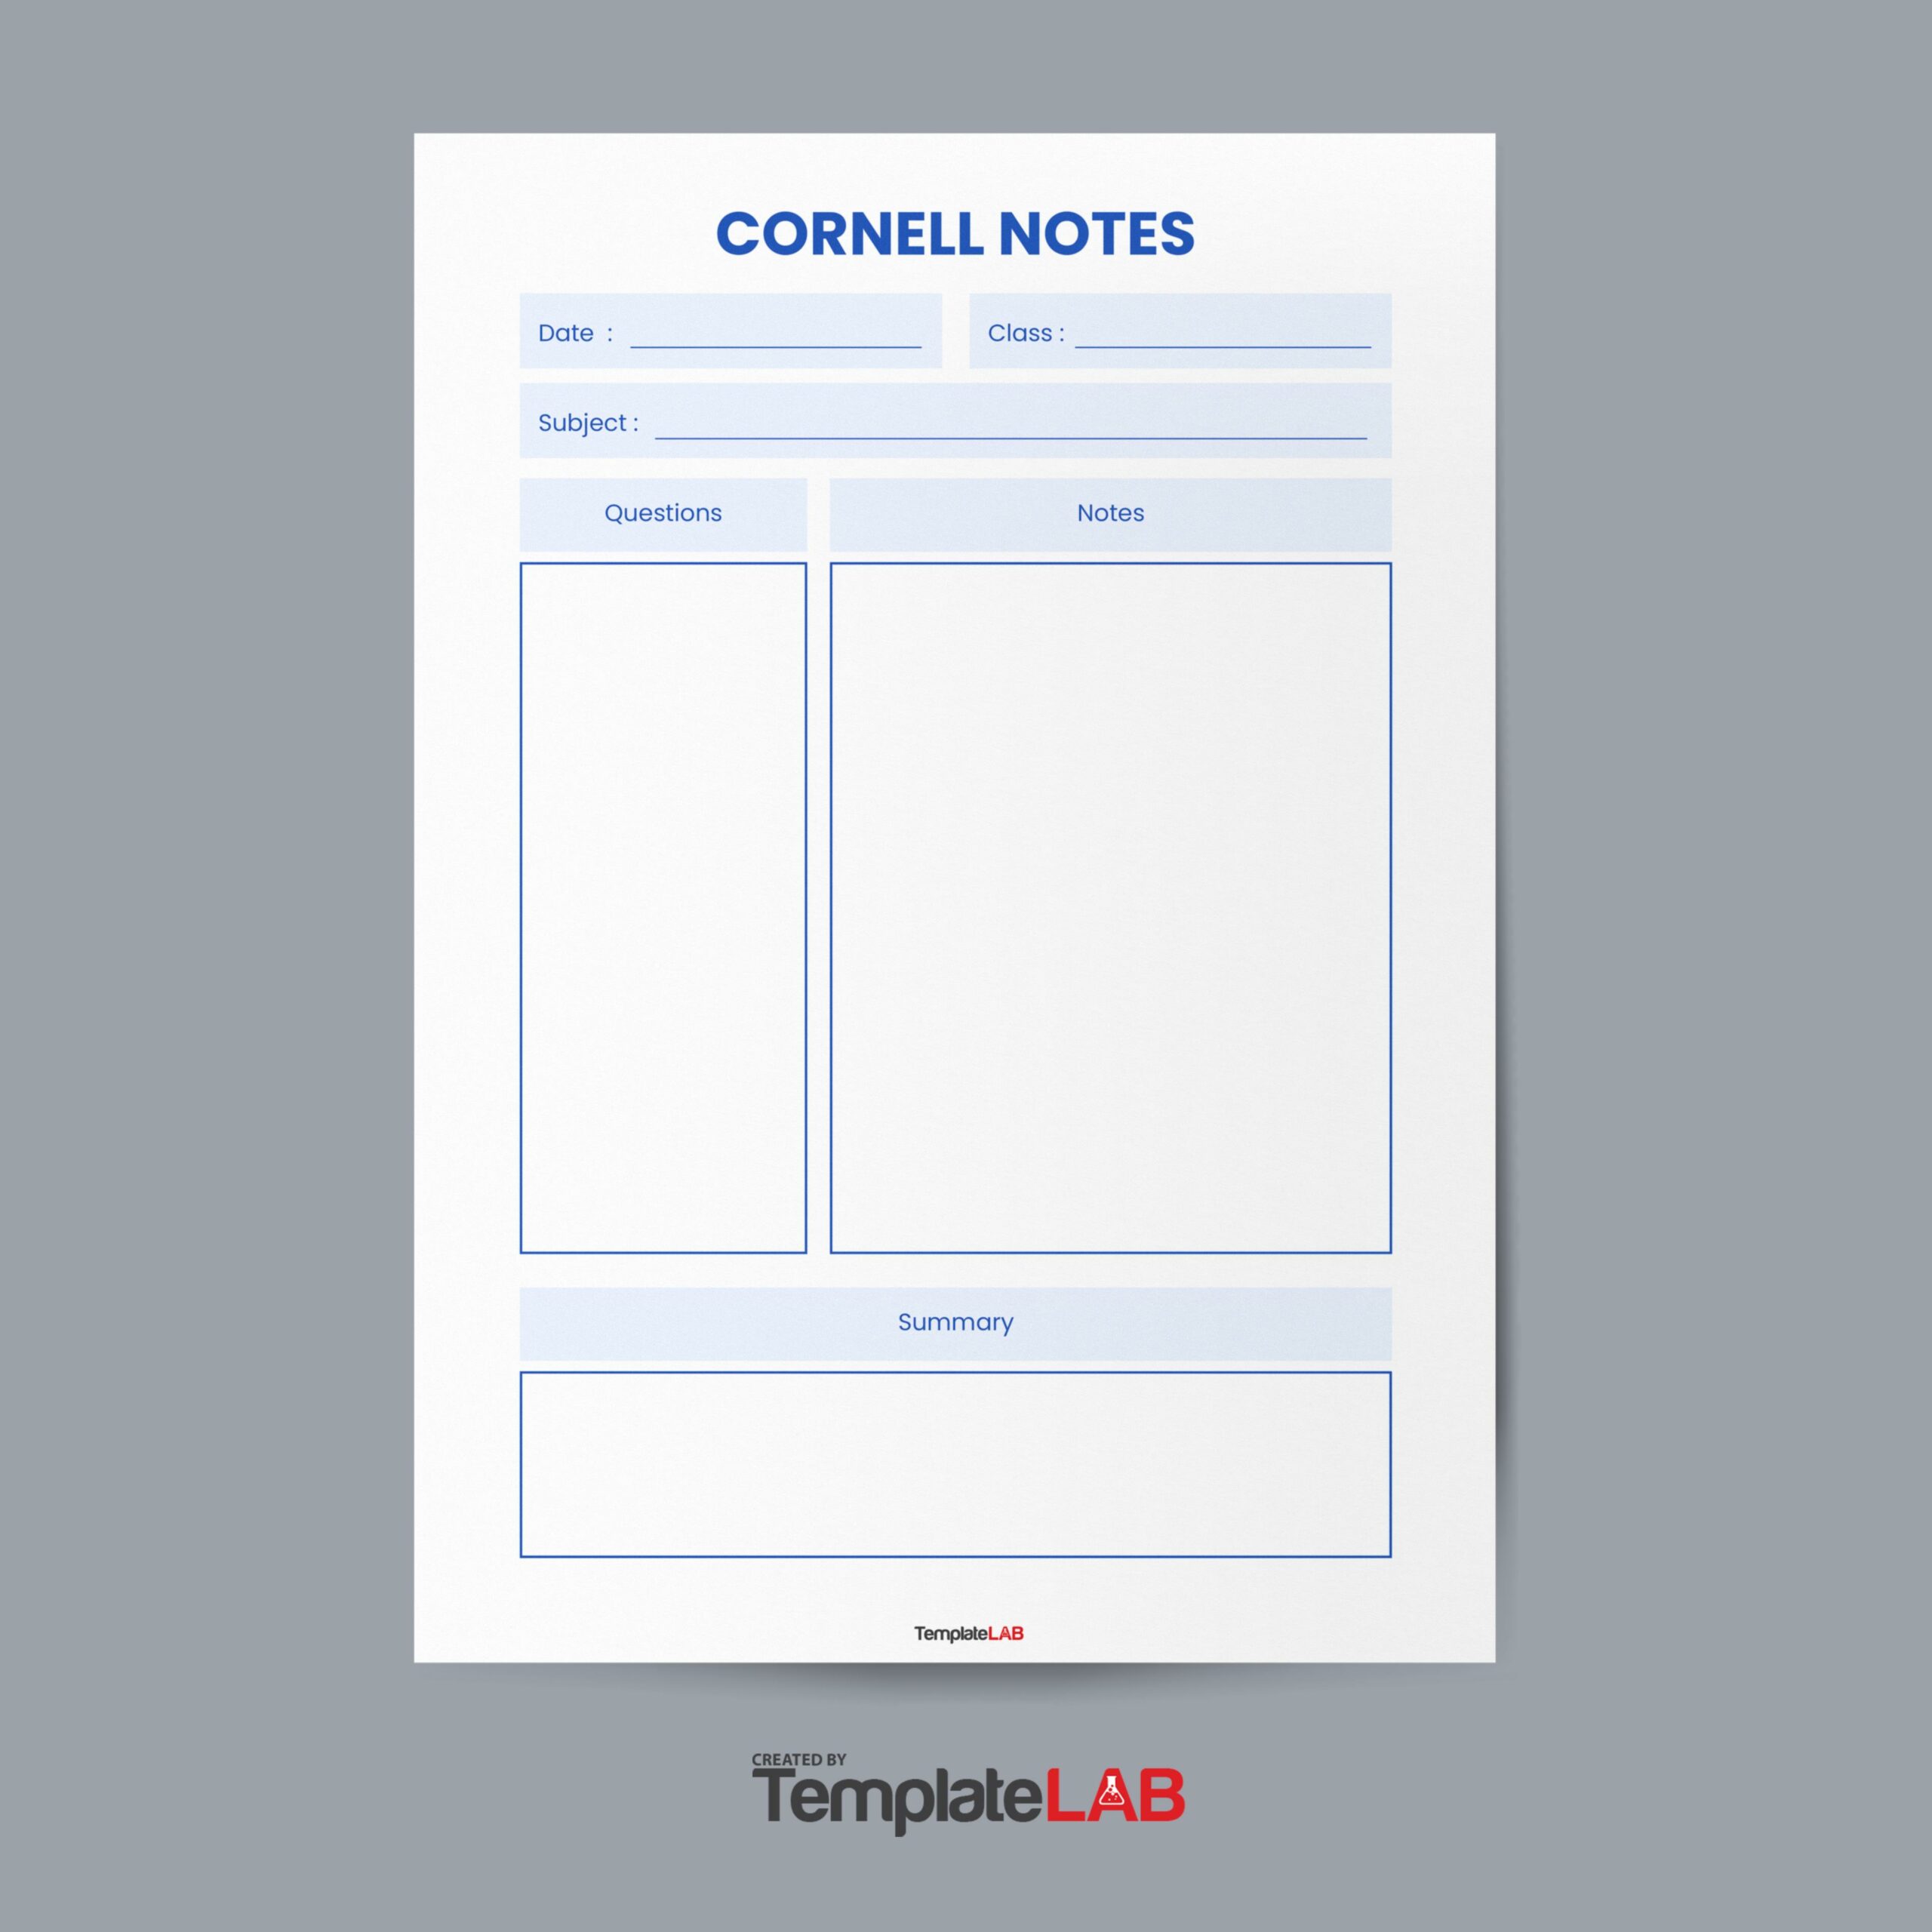 Free Cornell Notes Template V2